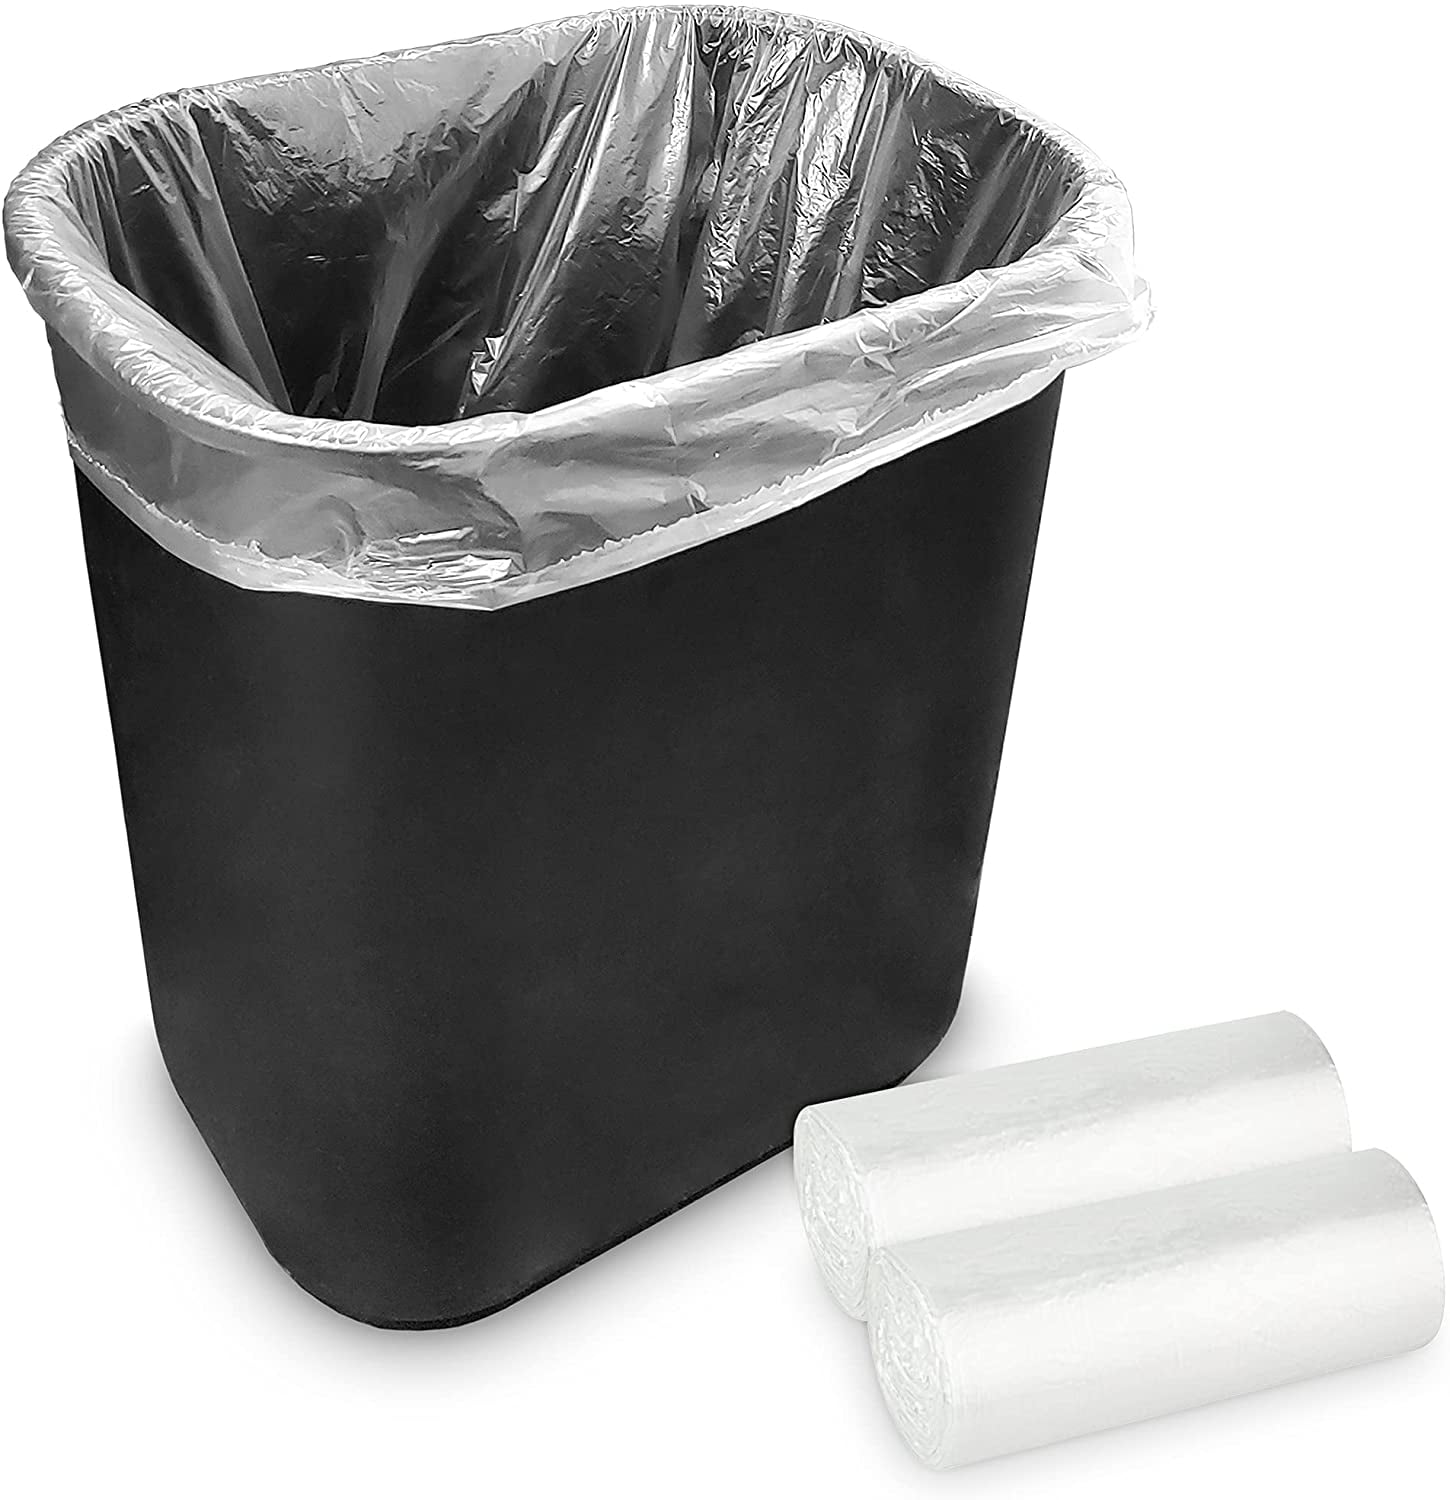 2.6 Gallon Colored Garbage Bags Bathroom Trash Can Liners 200 count, 5 Colors 